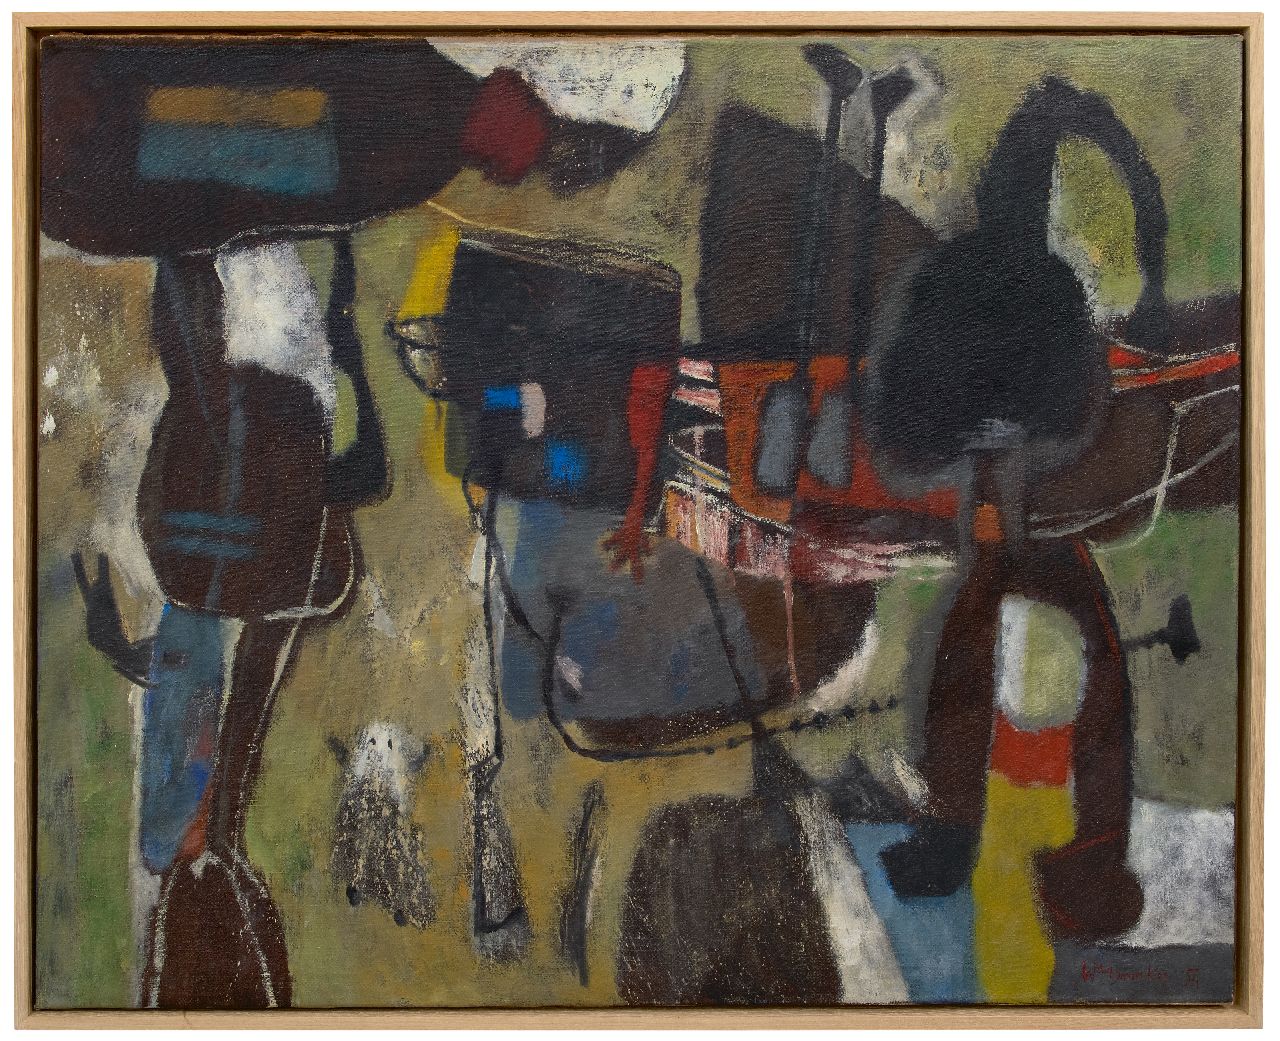 Wagemaker A.B.  | Adriaan Barend 'Jaap' Wagemaker | Paintings offered for sale | Donkere figuren (Dark figures), oil on canvas 106.4 x 130.3 cm, signed l.r. and dated '54